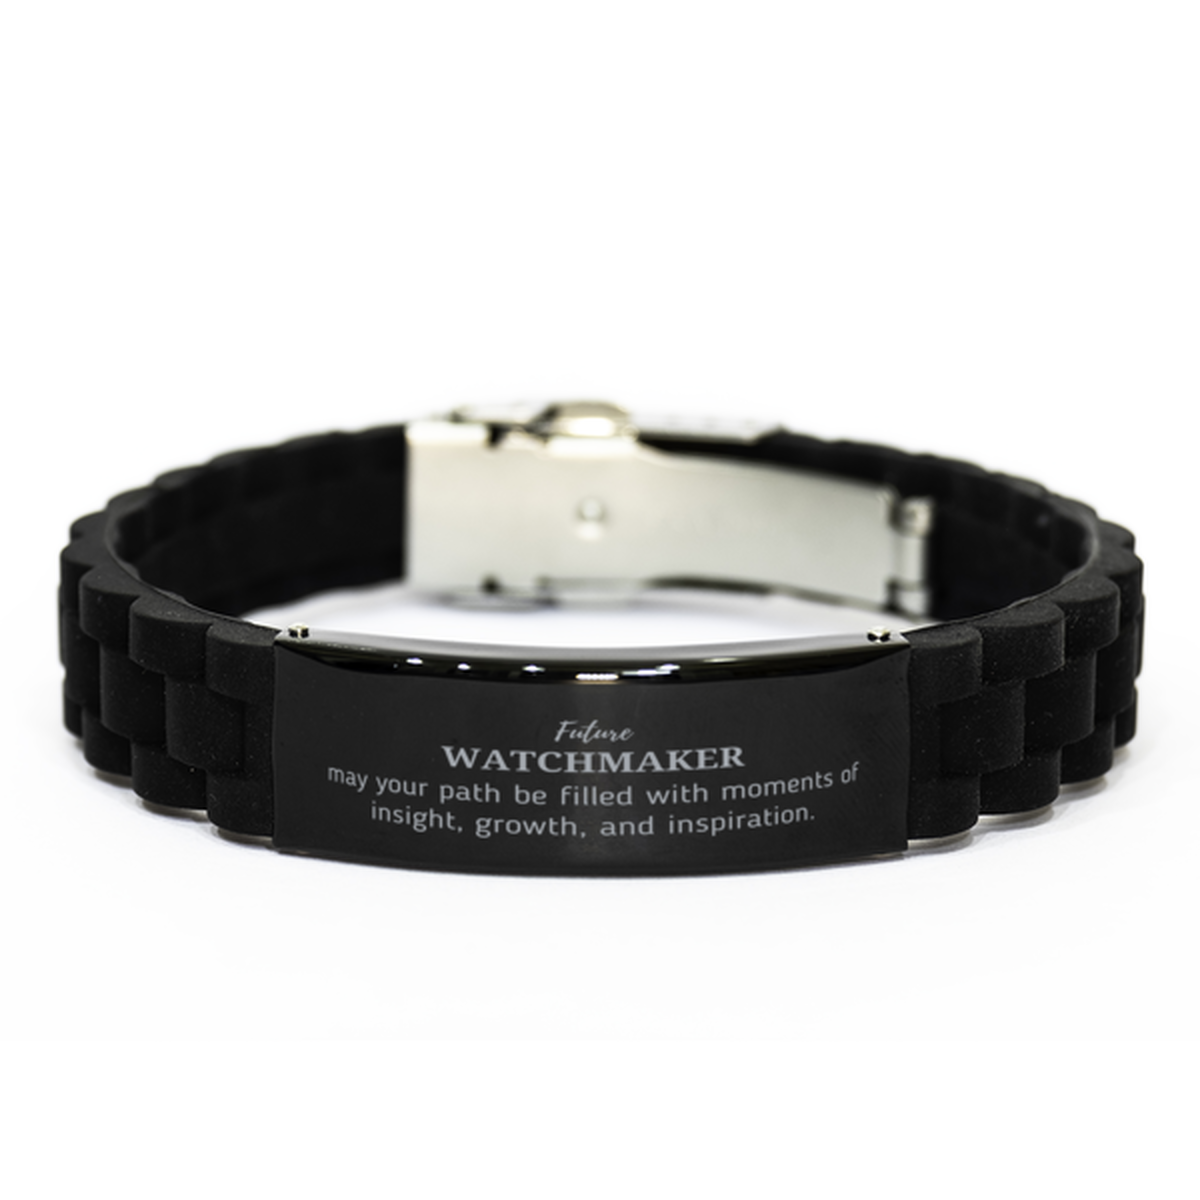 Future Watchmaker Gifts, May your path be filled with moments of insight, Graduation Gifts for New Watchmaker, Christmas Unique Black Glidelock Clasp Bracelet For Men, Women, Friends